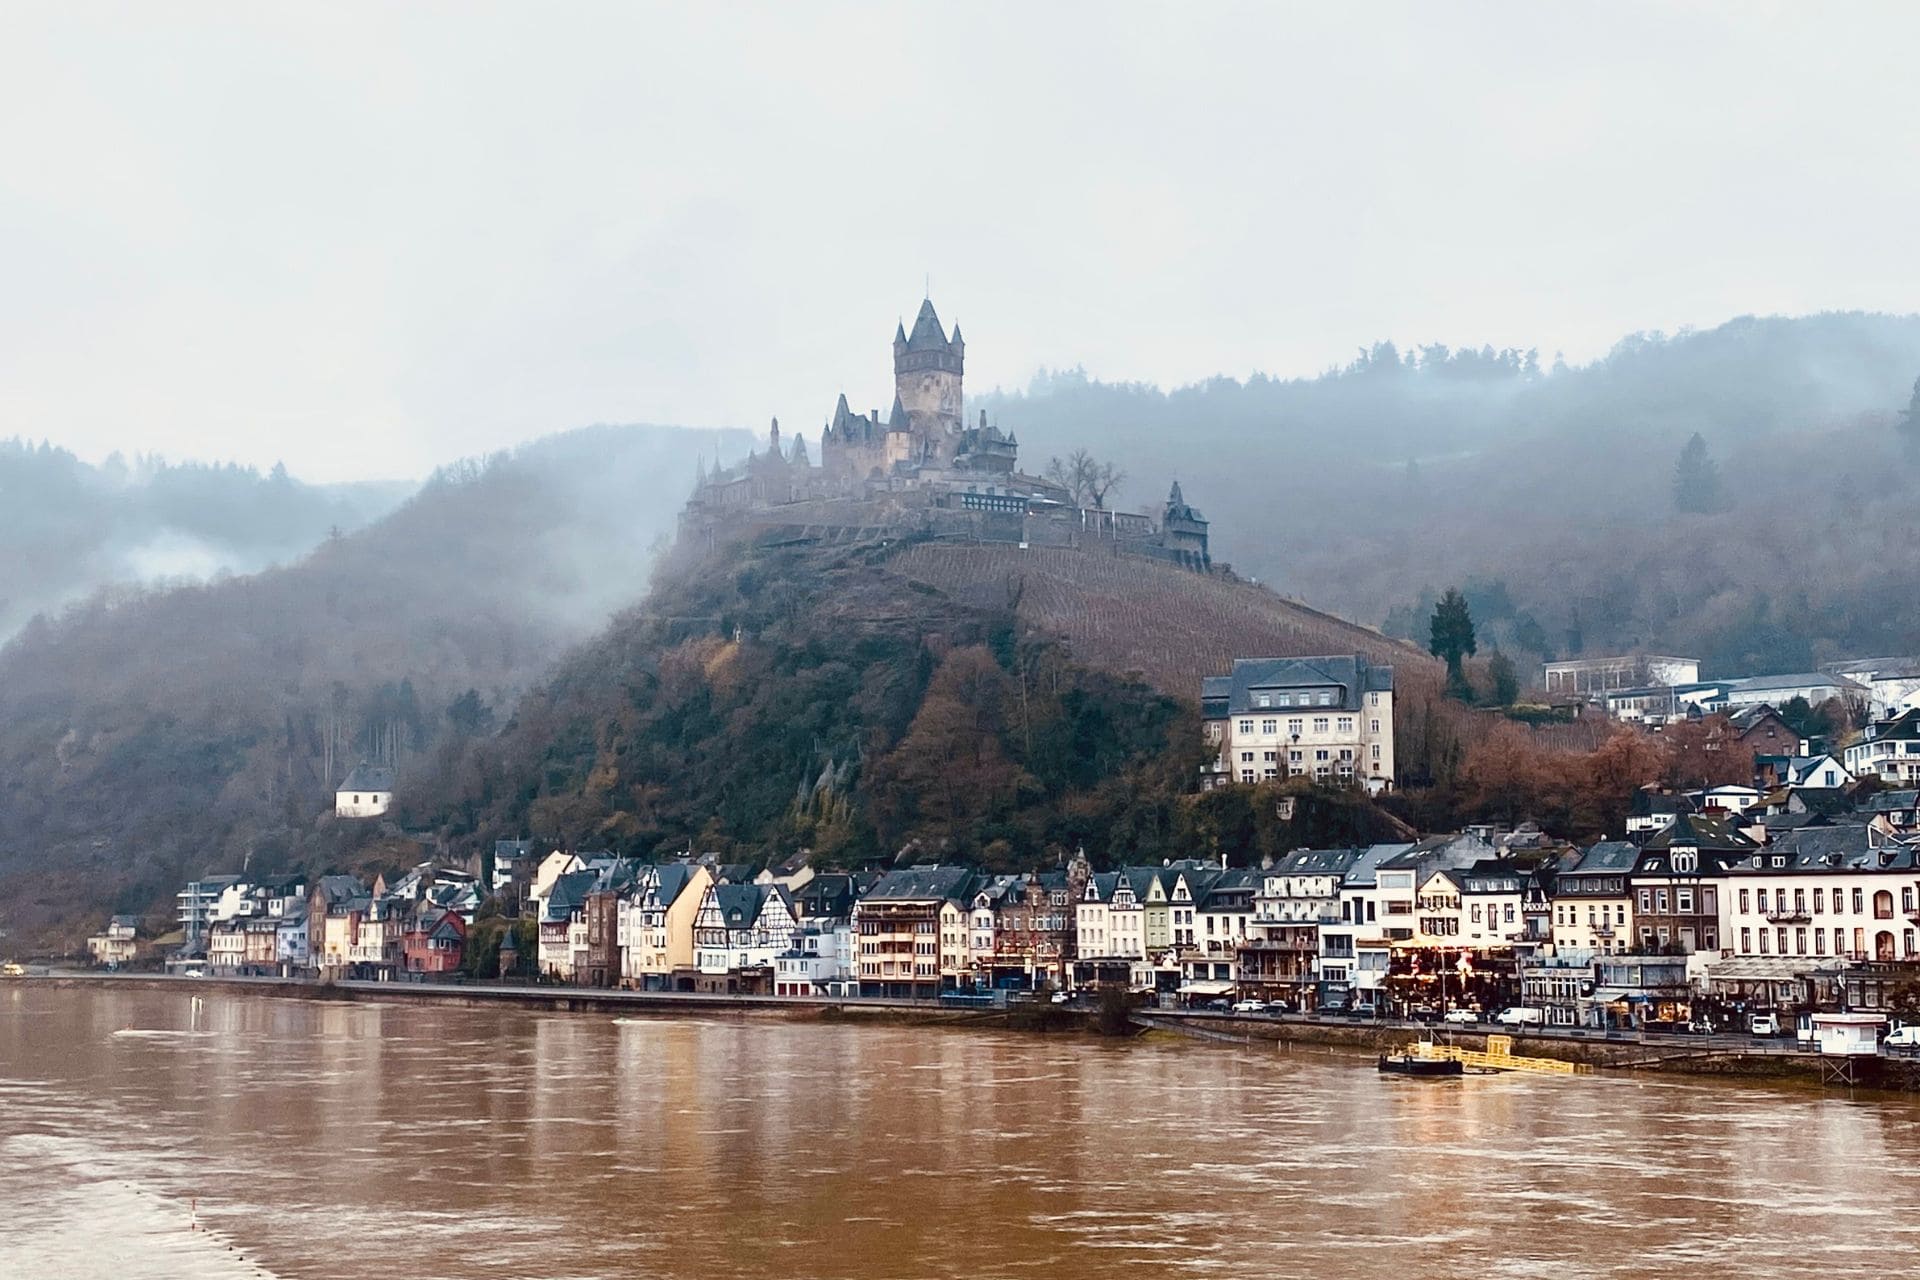 The Reichsburg Cochem above the old town of Cochem - fog rises around the castle hill - angiestravelroutes.com